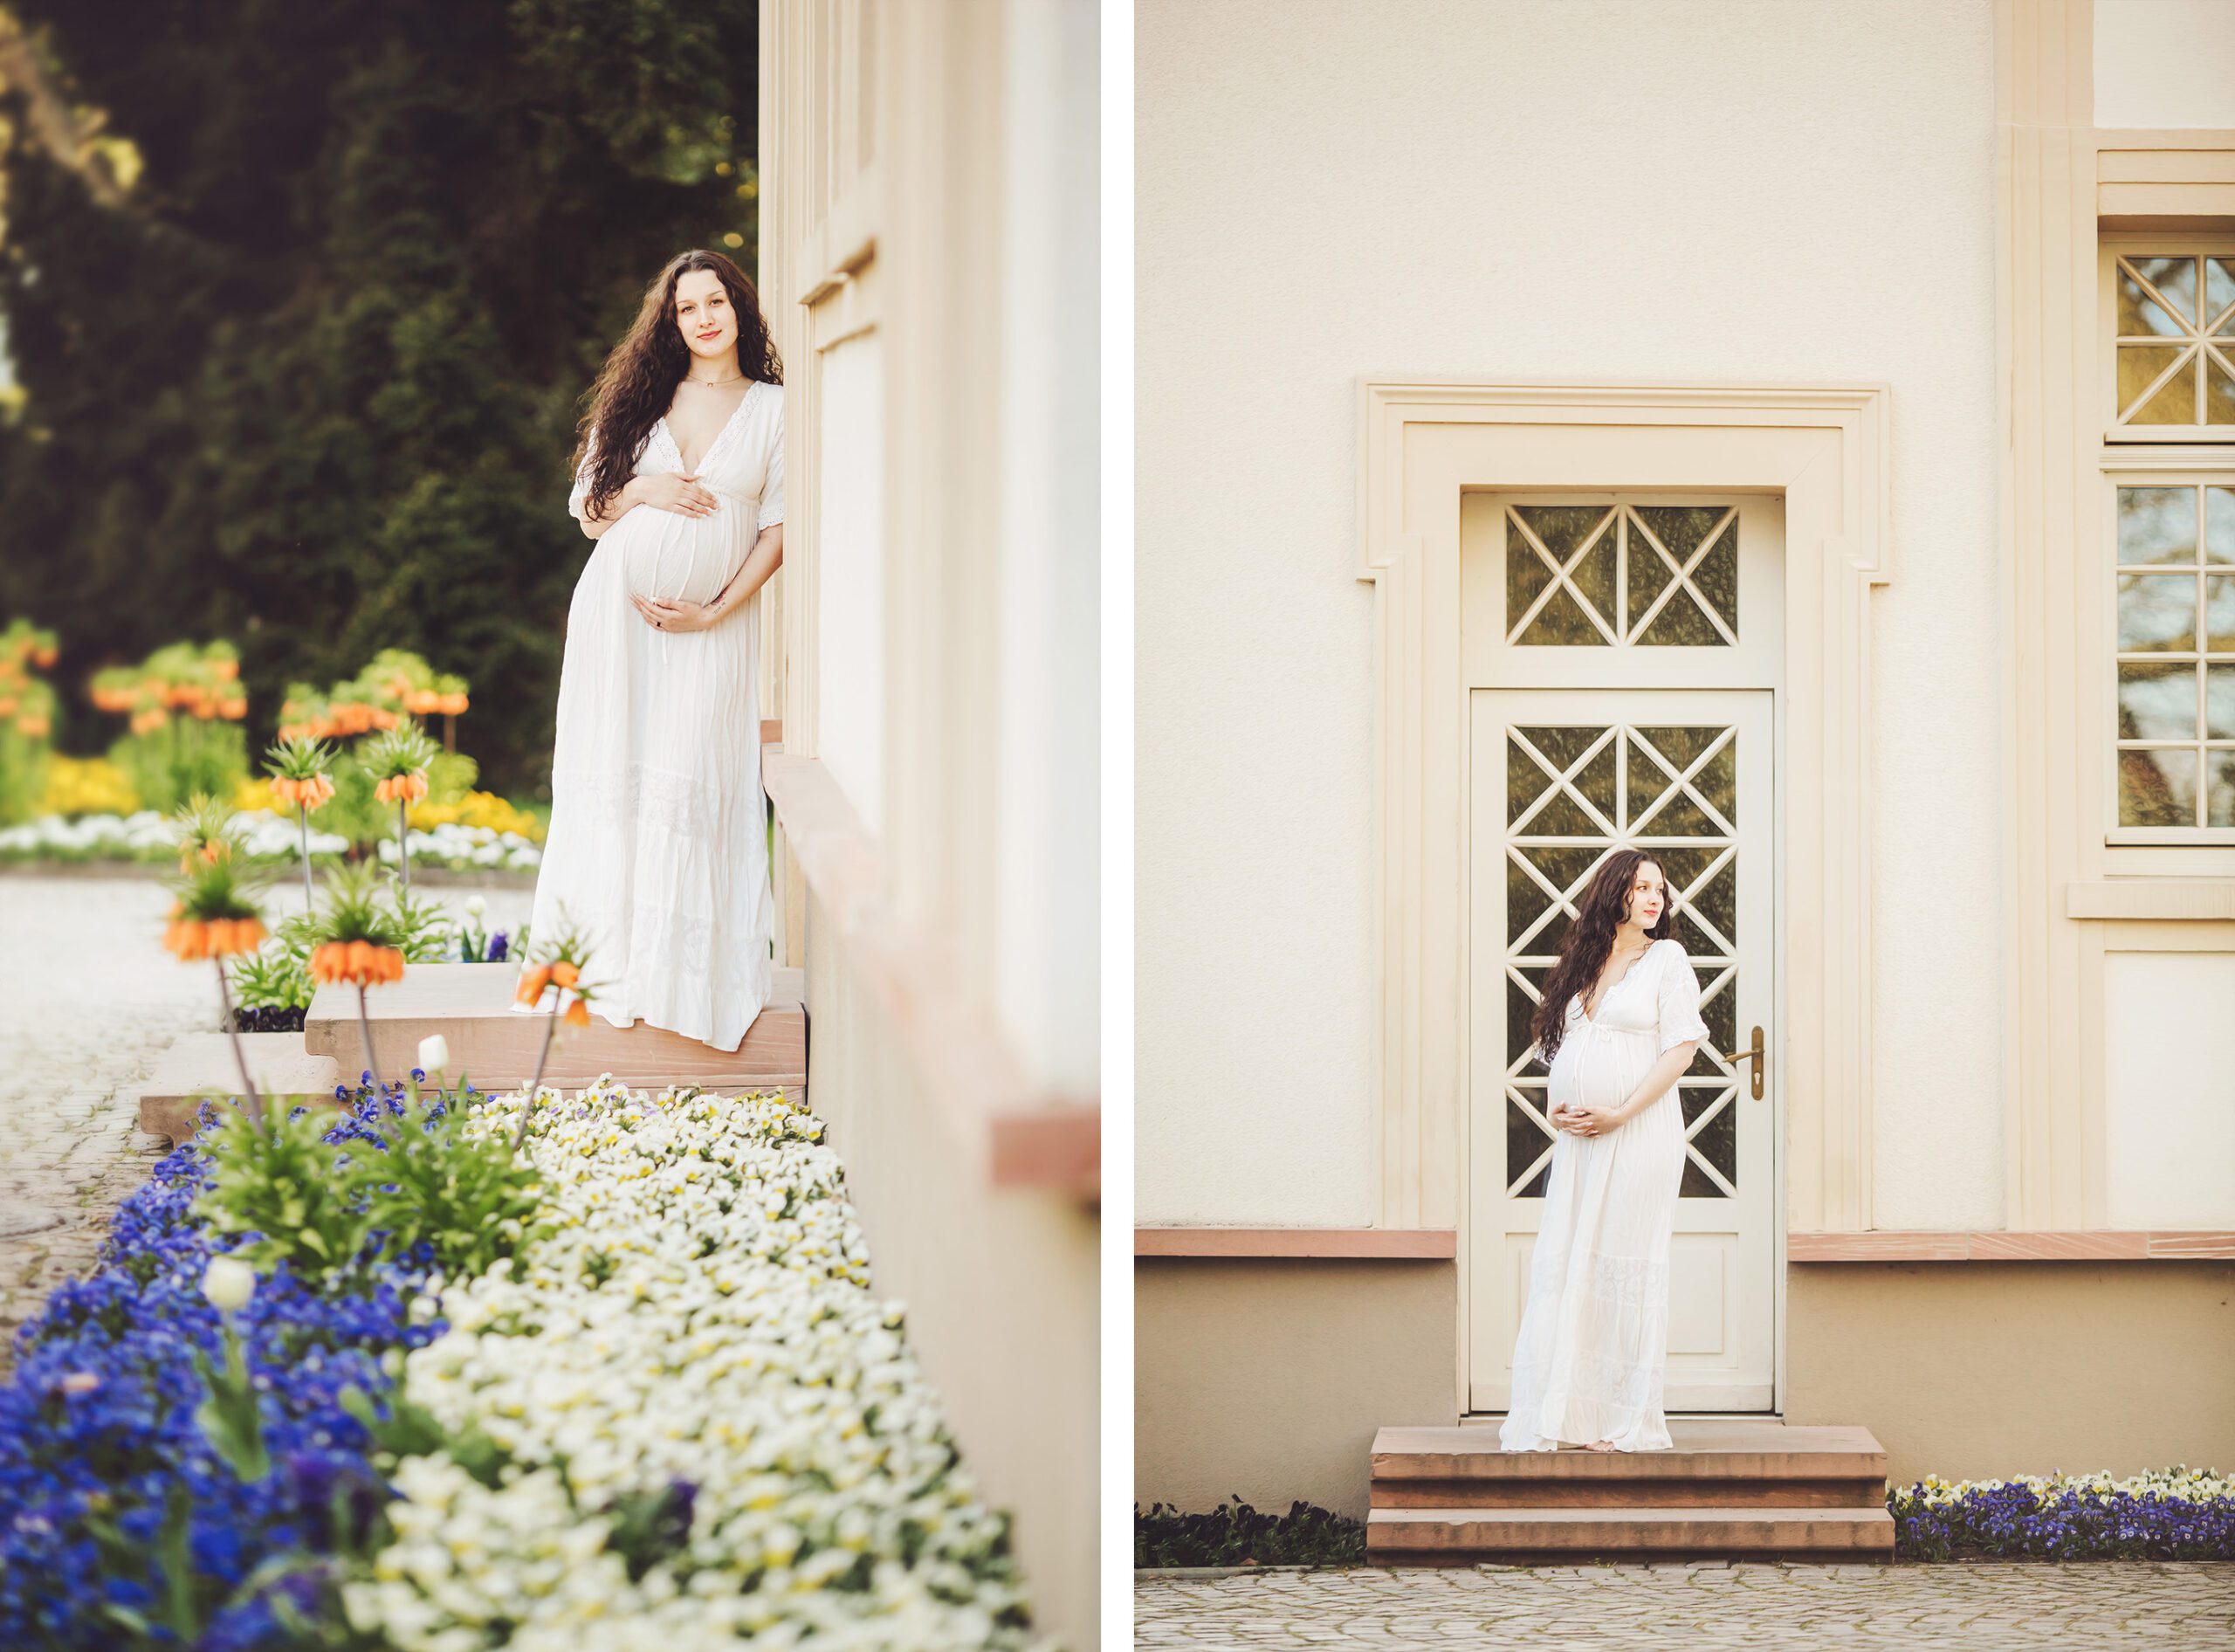 The Bad Homburg Orangerie creates beautiful framing and a backdrop for spring sessions